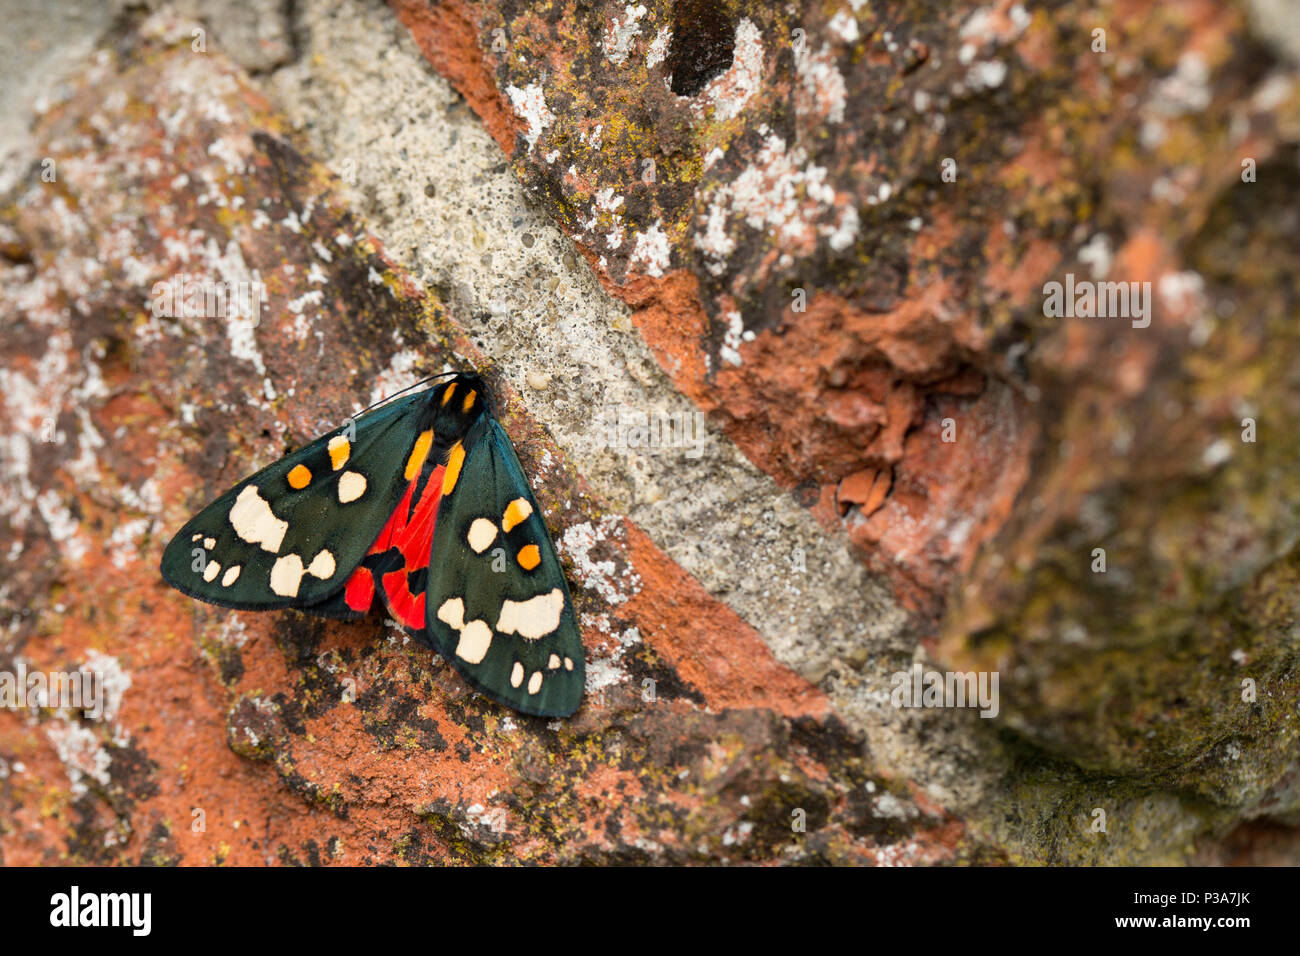 A scarlet tiger moth, Callimorpha dominula, on an old red brick bridge. Comfrey was growing nearby which is one of the scarlet tiger moth caterpillars Stock Photo